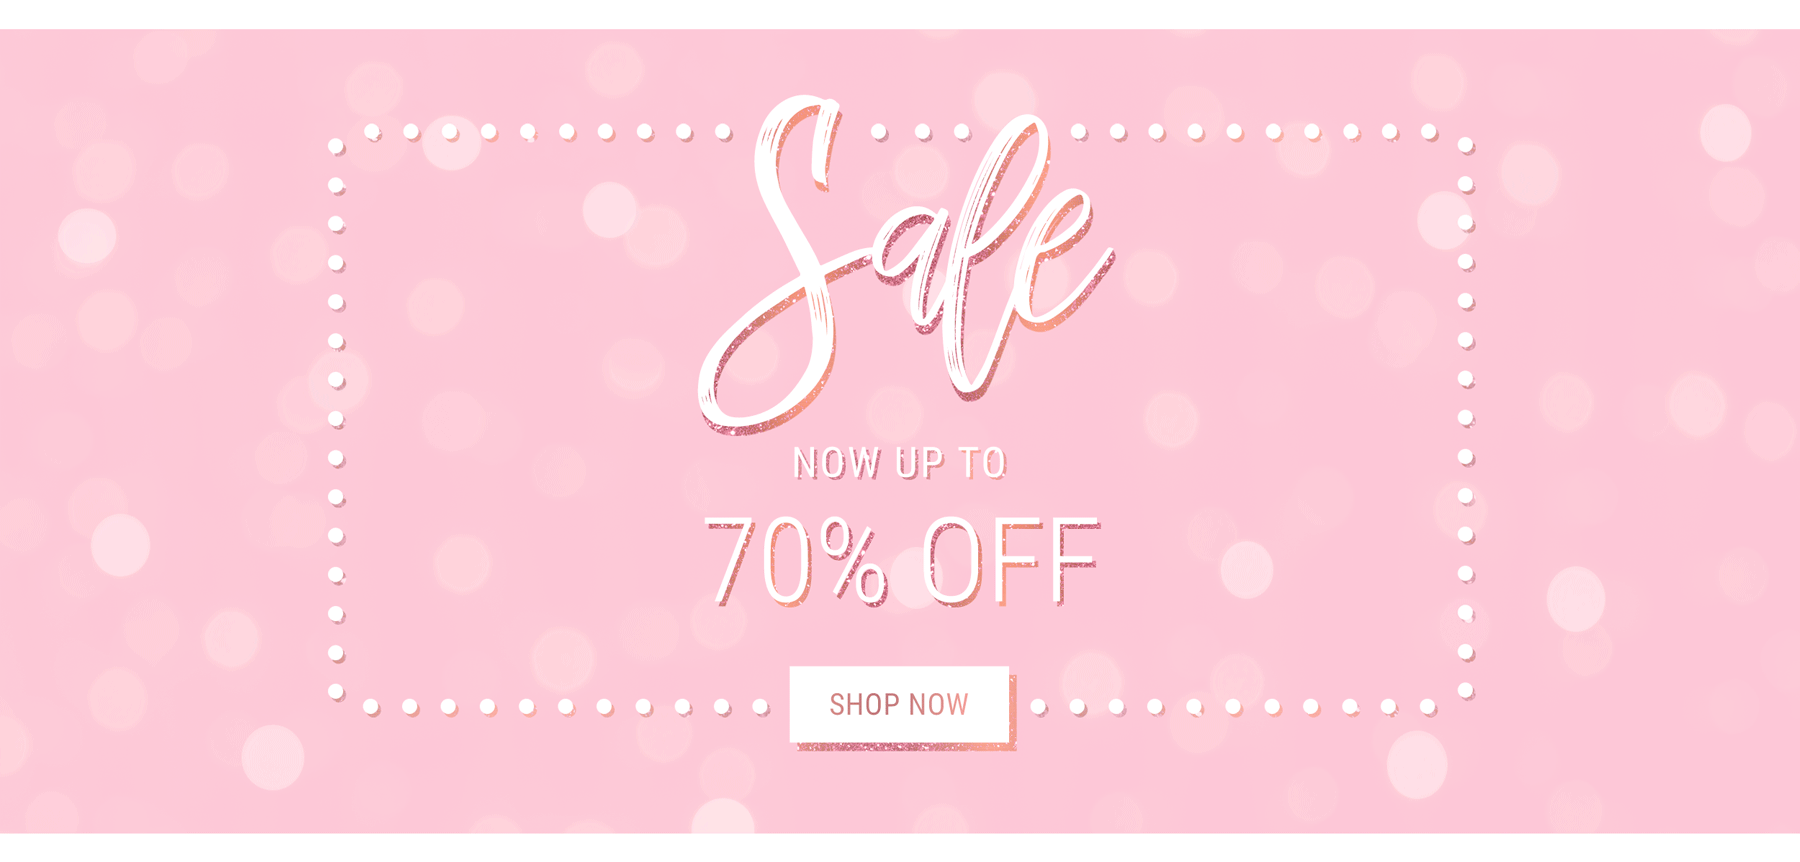 Pink Boutique: Sale up to 70% off womens clothing